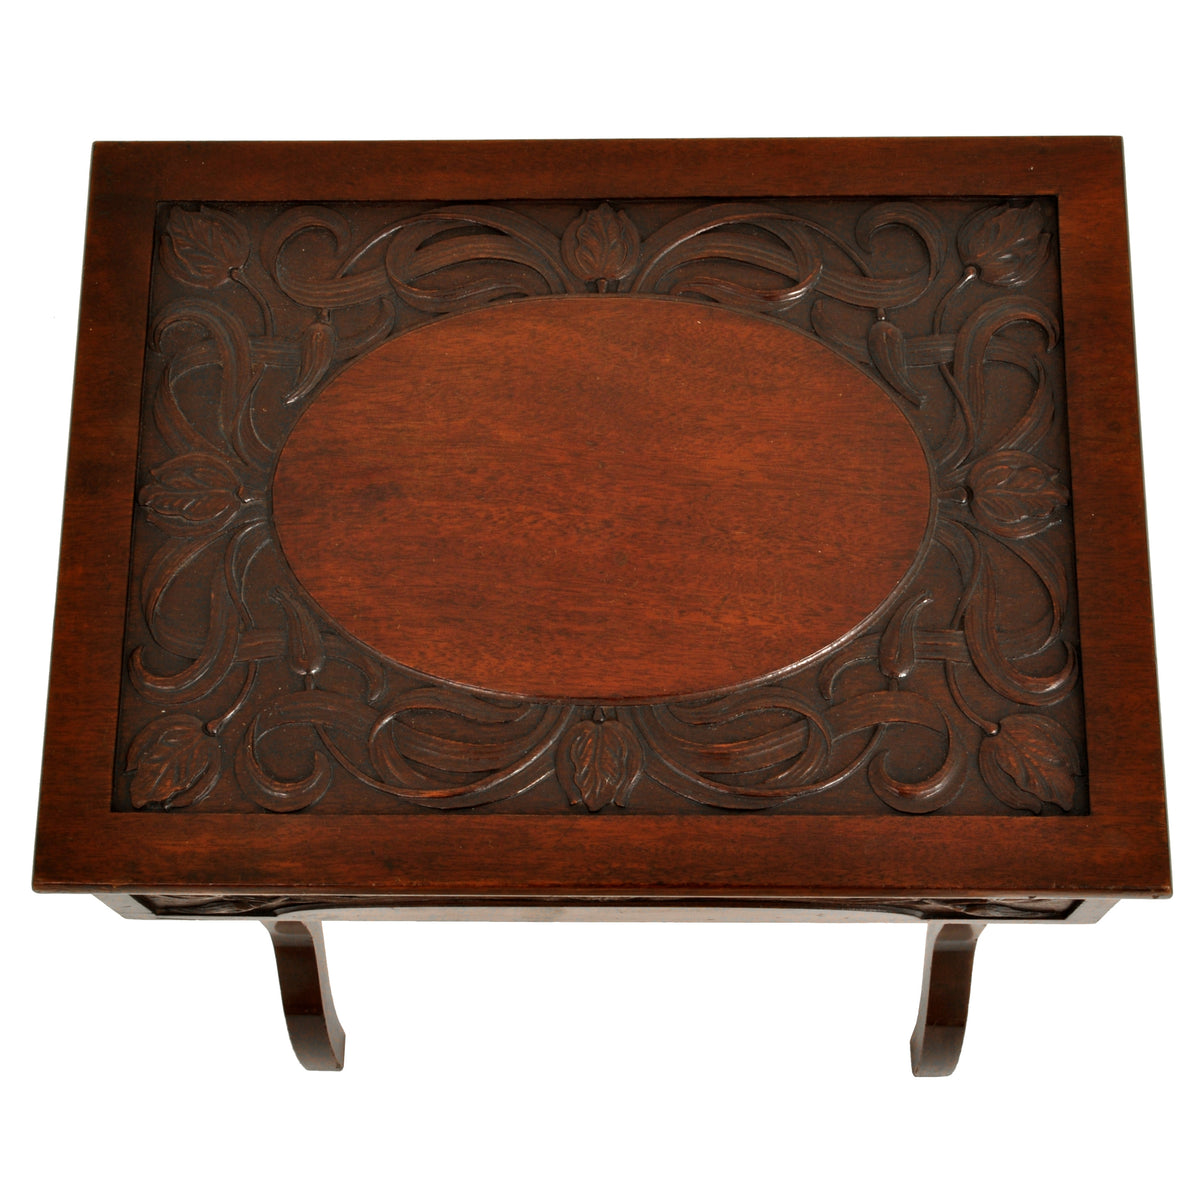 Antique Art Nouveau Scottish Arts & Crafts Carved Walnut Sewing Work Table, circa 1900